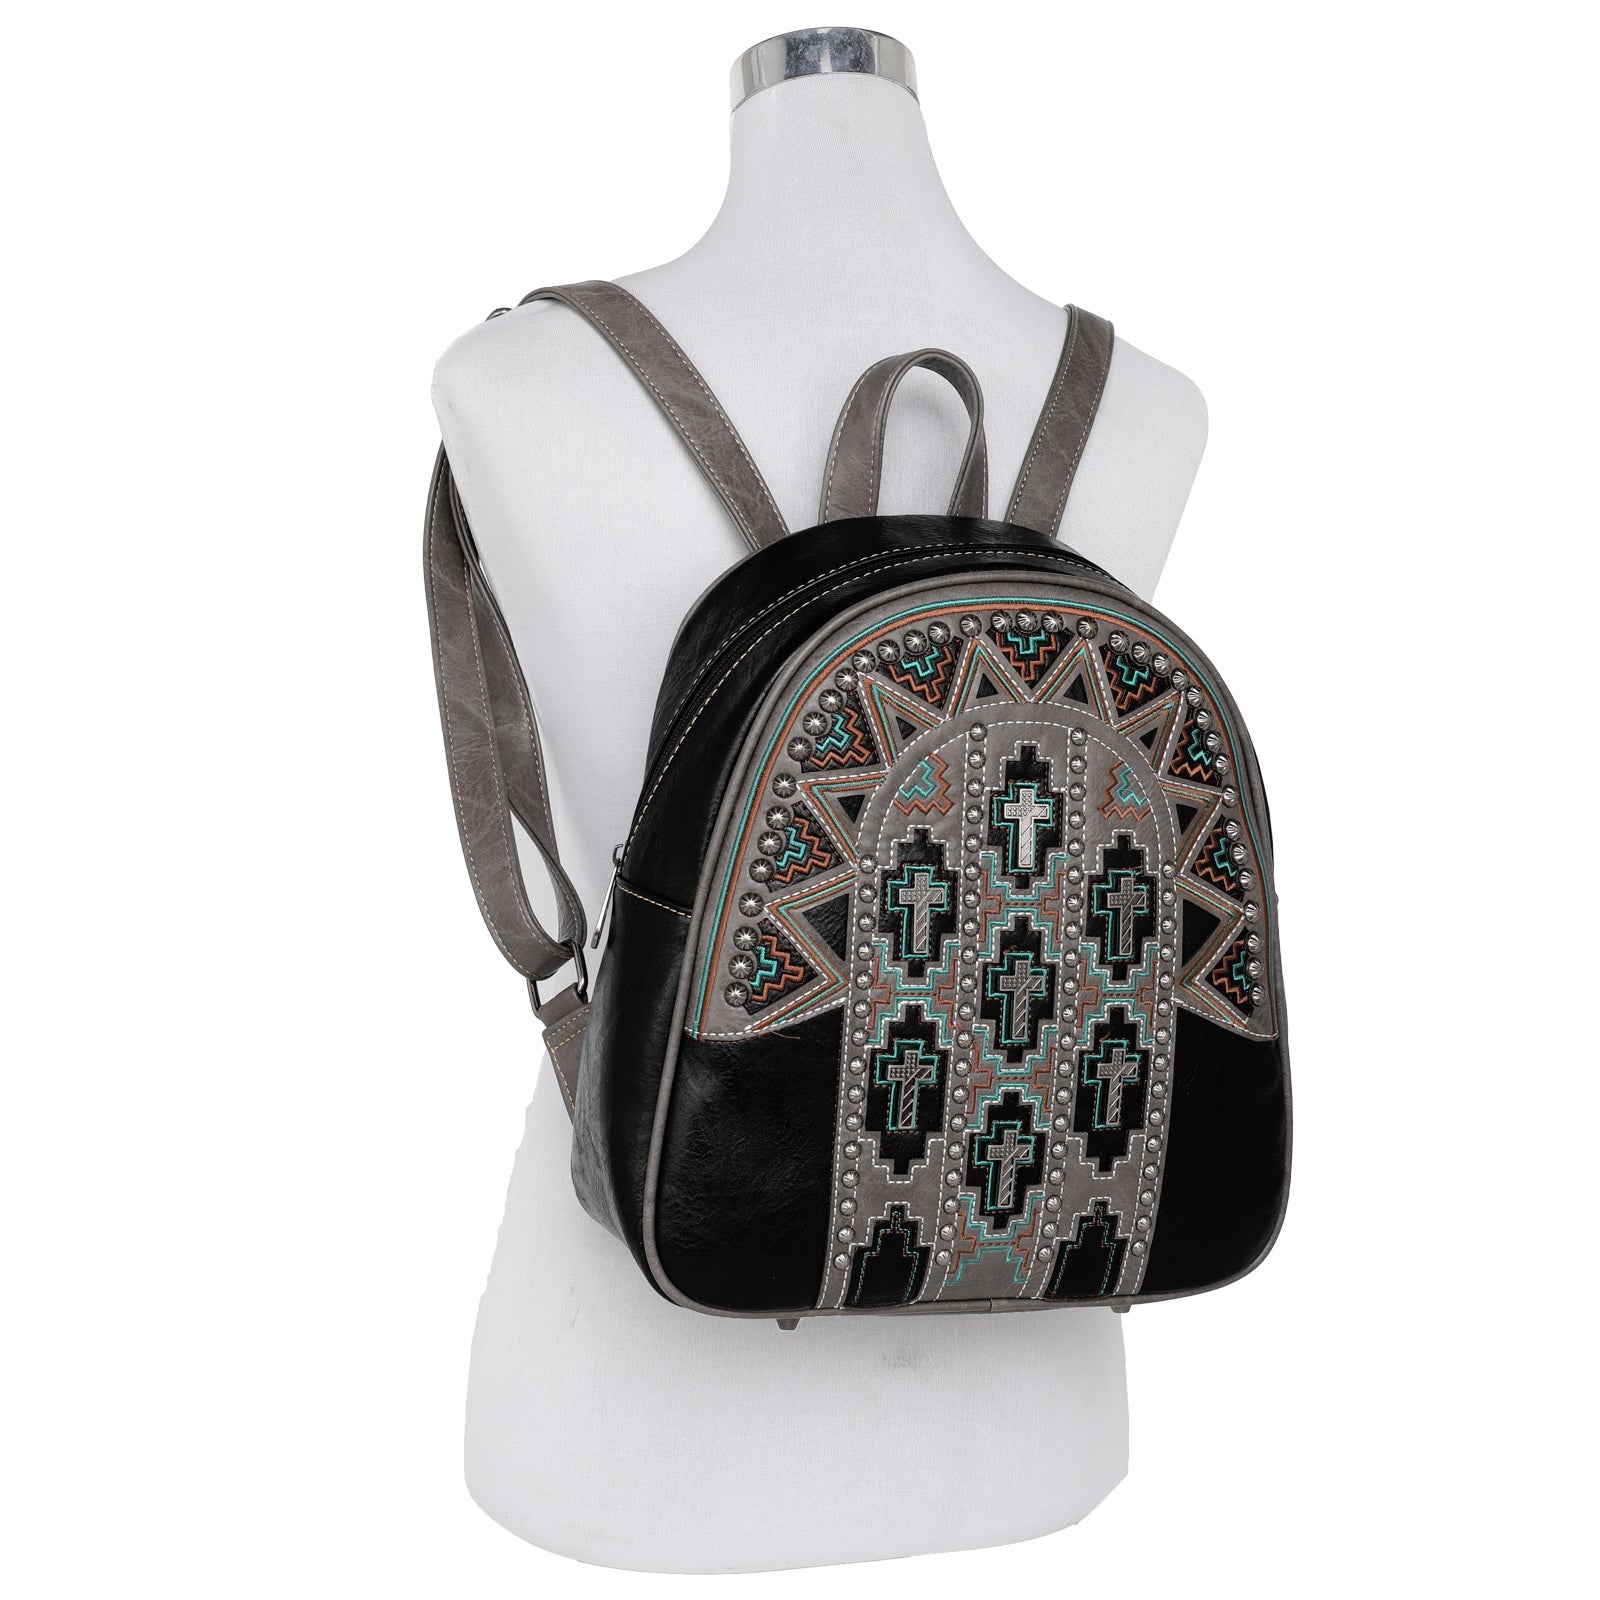 Montana West Concho Collection Backpack - Montana West World